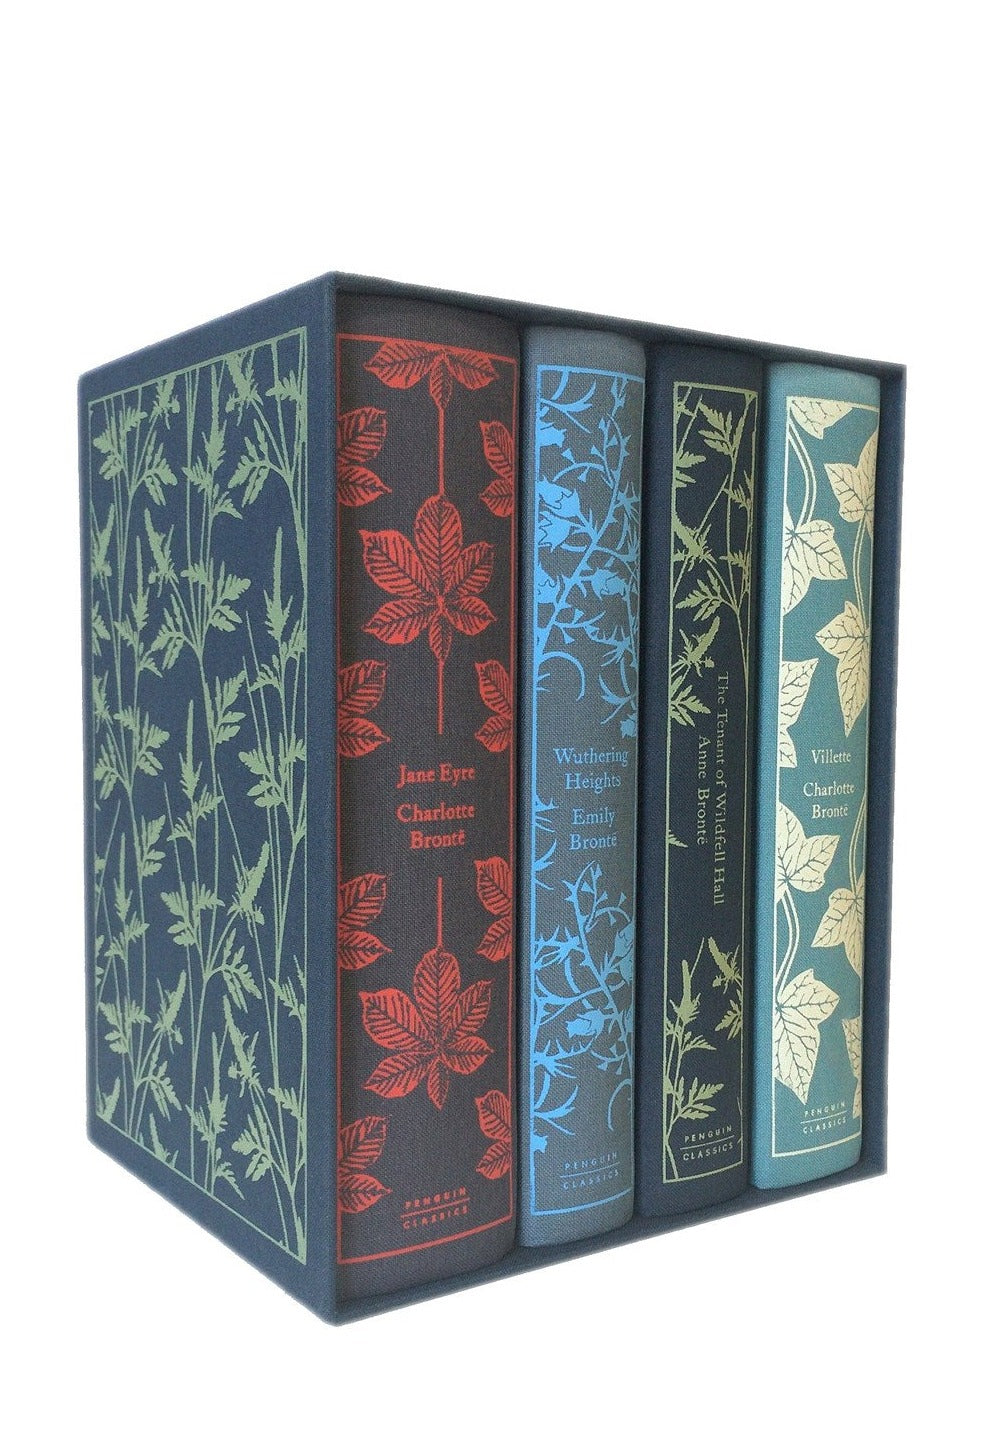 The Brontë Sisters Boxed Set: Jane Eyre; Wuthering Heights; The Tenant of Wildfell Hall; Villette